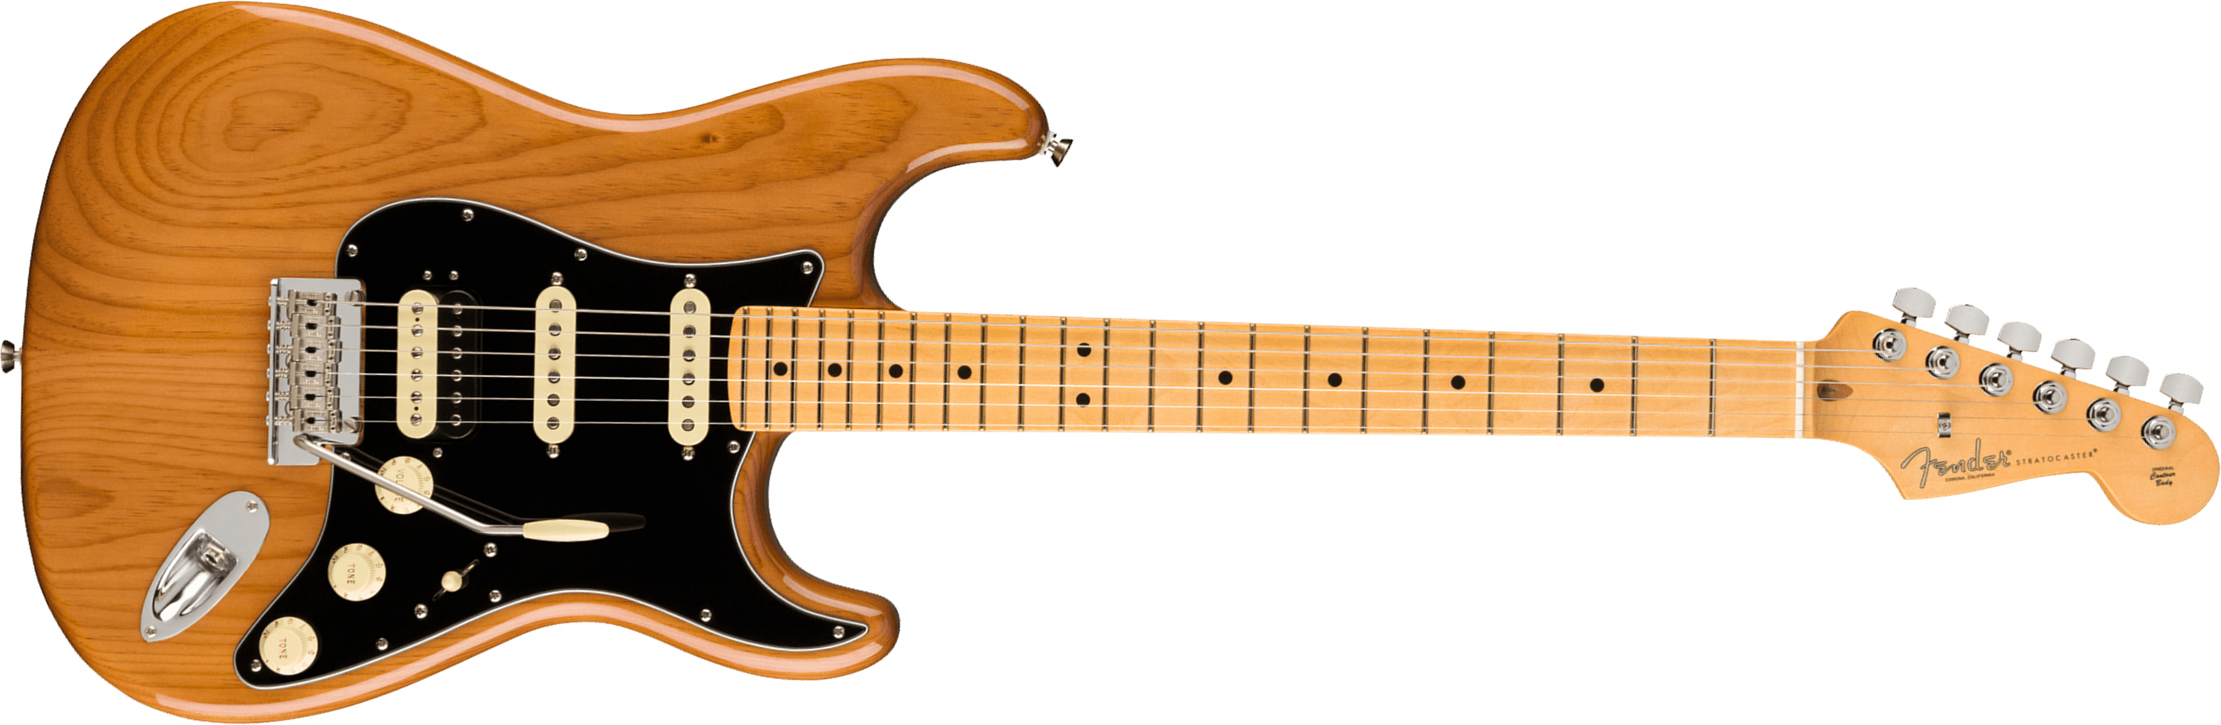 Fender Strat American Professional Ii Hss Usa Mn - Roasted Pine - Str shape electric guitar - Main picture